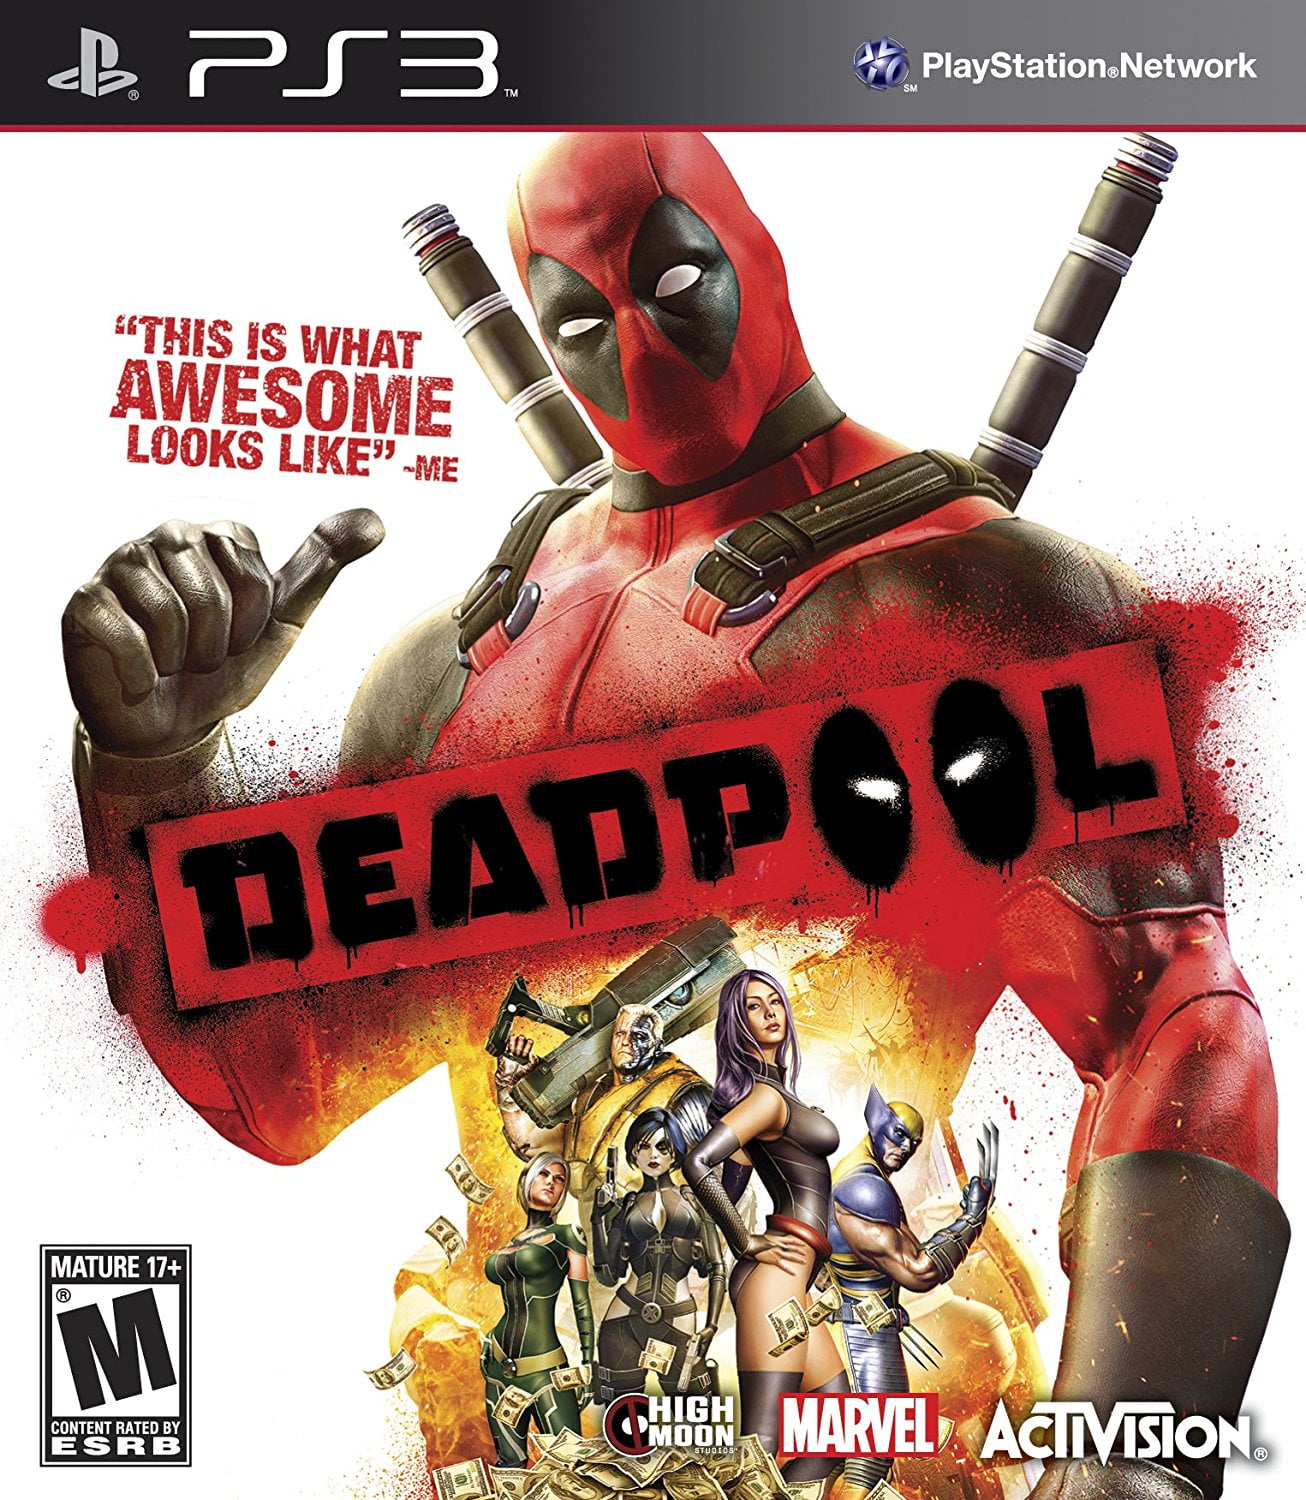 Deadpool - PlayStation 3, Let's Get Some Action: I made sure to capture all my good sides, so I made my game a third-person, action-shooter..., By Activision from USA